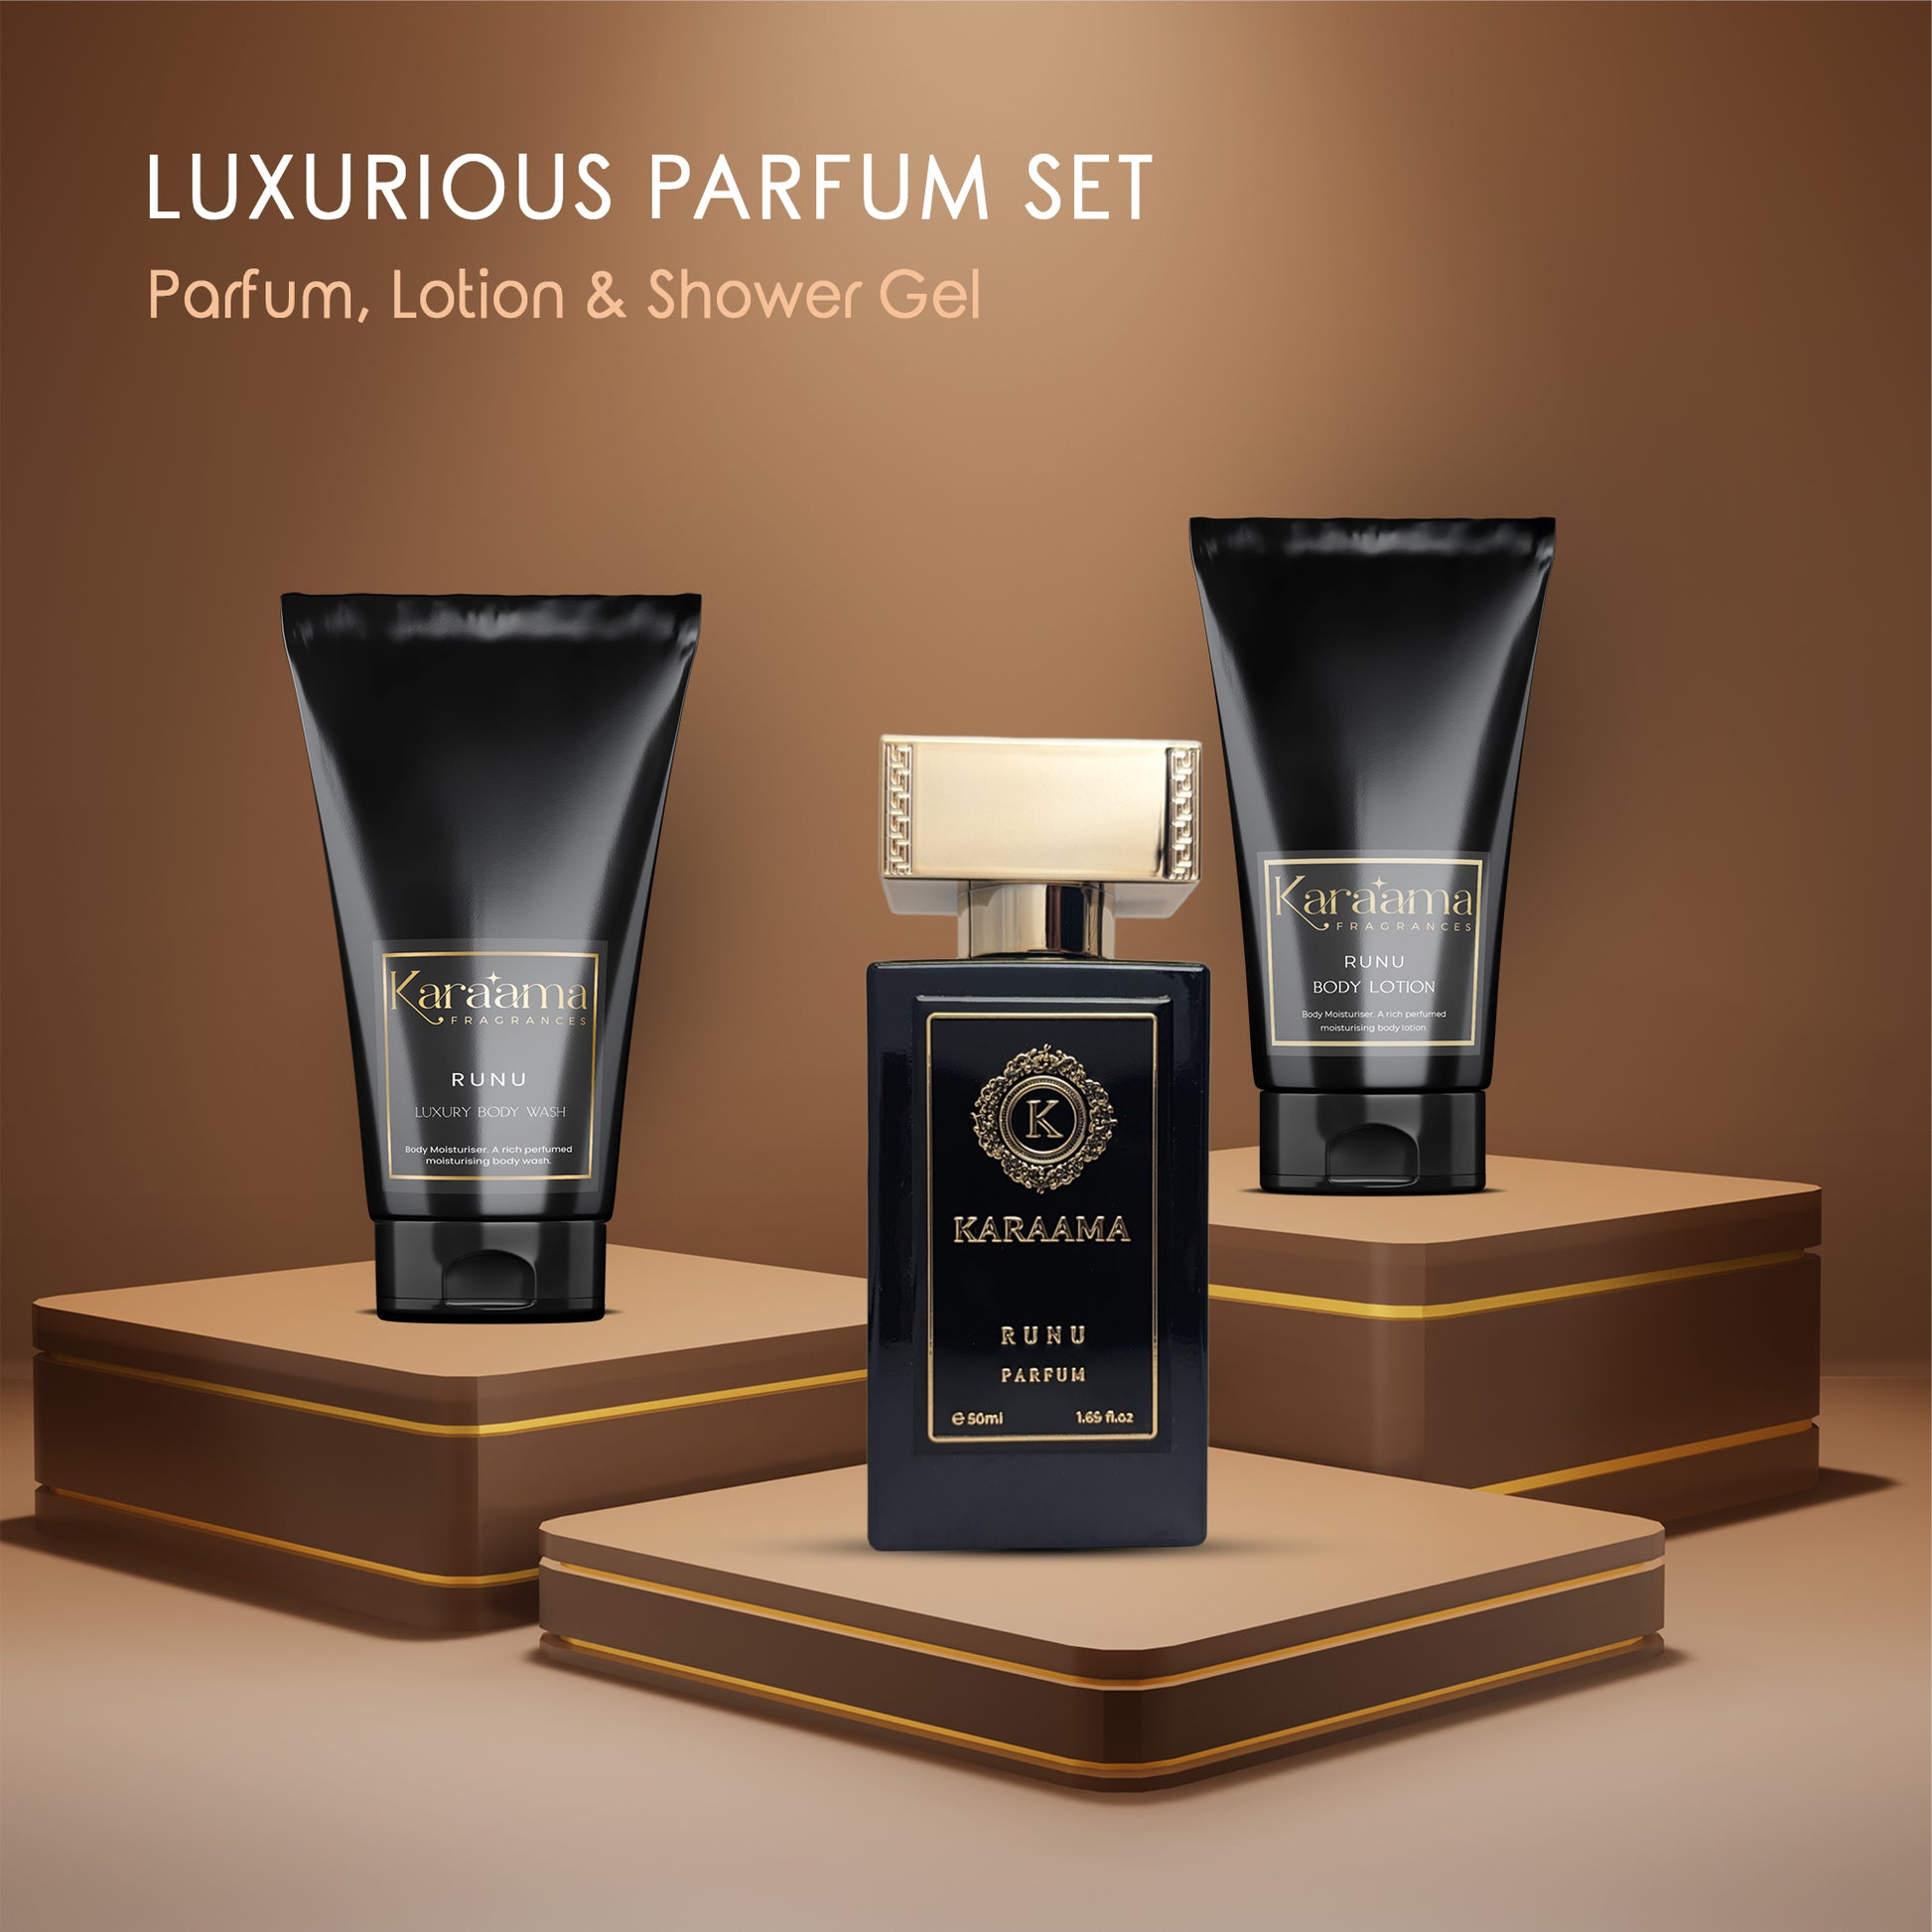 Elevate your daily routine with the Karaama Ruruu Luxurious Parfum Set, featuring an elegant perfume, nourishing body lotion, and refreshing shower gel, all presented on chic golden pedestals. #PerfumeSet #LuxuryBeauty #SelfCareTrends #FragranceCollection #ElegantGifts